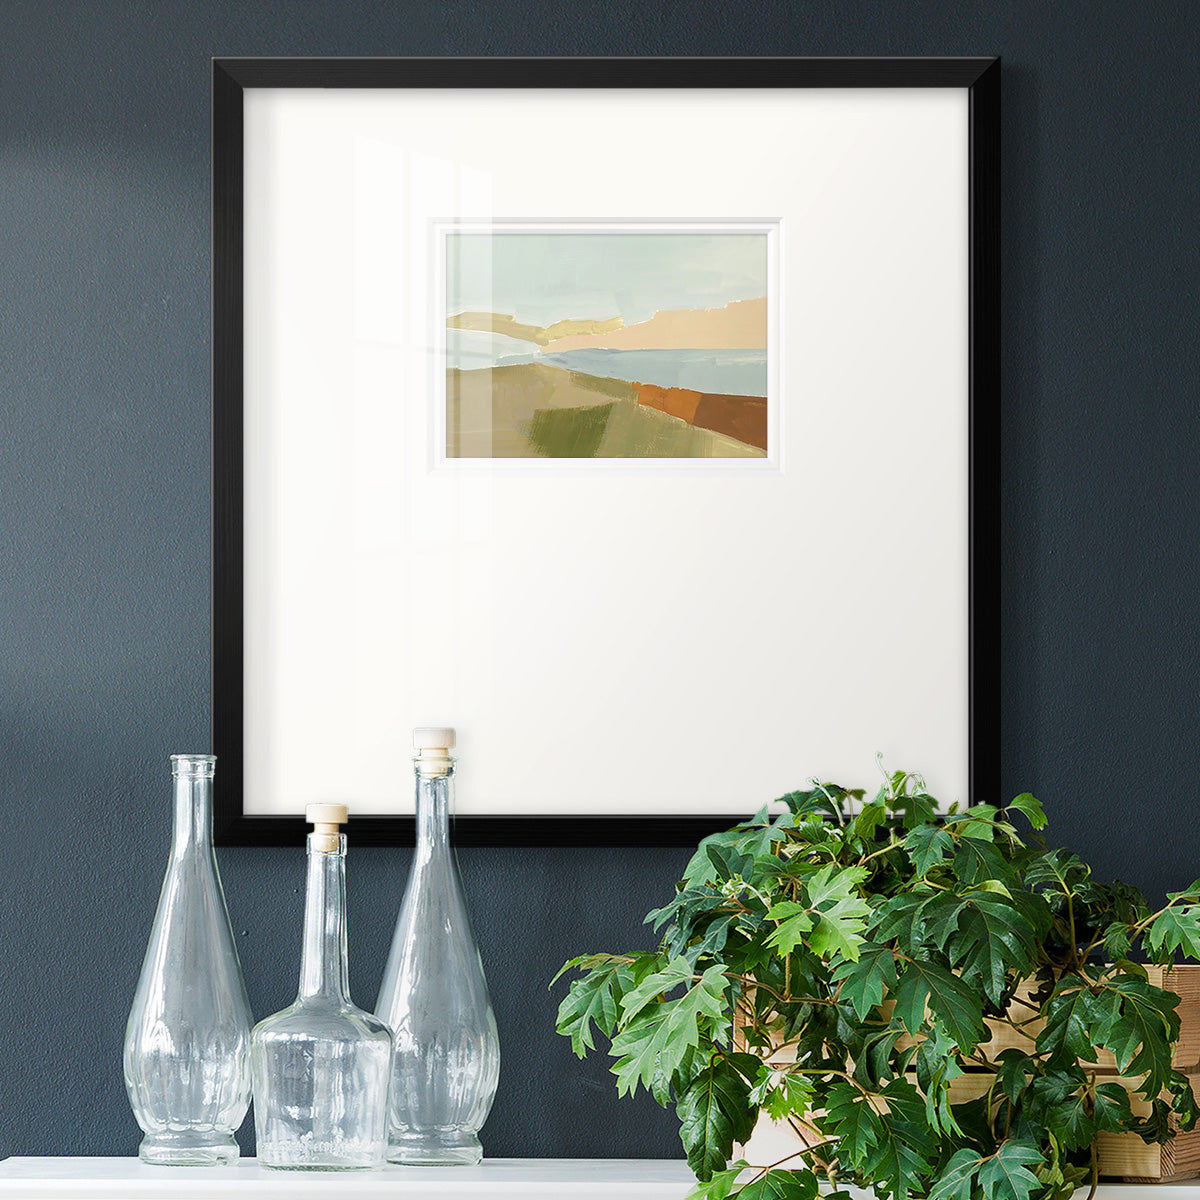 Stacked Landscape III Premium Framed Print Double Matboard